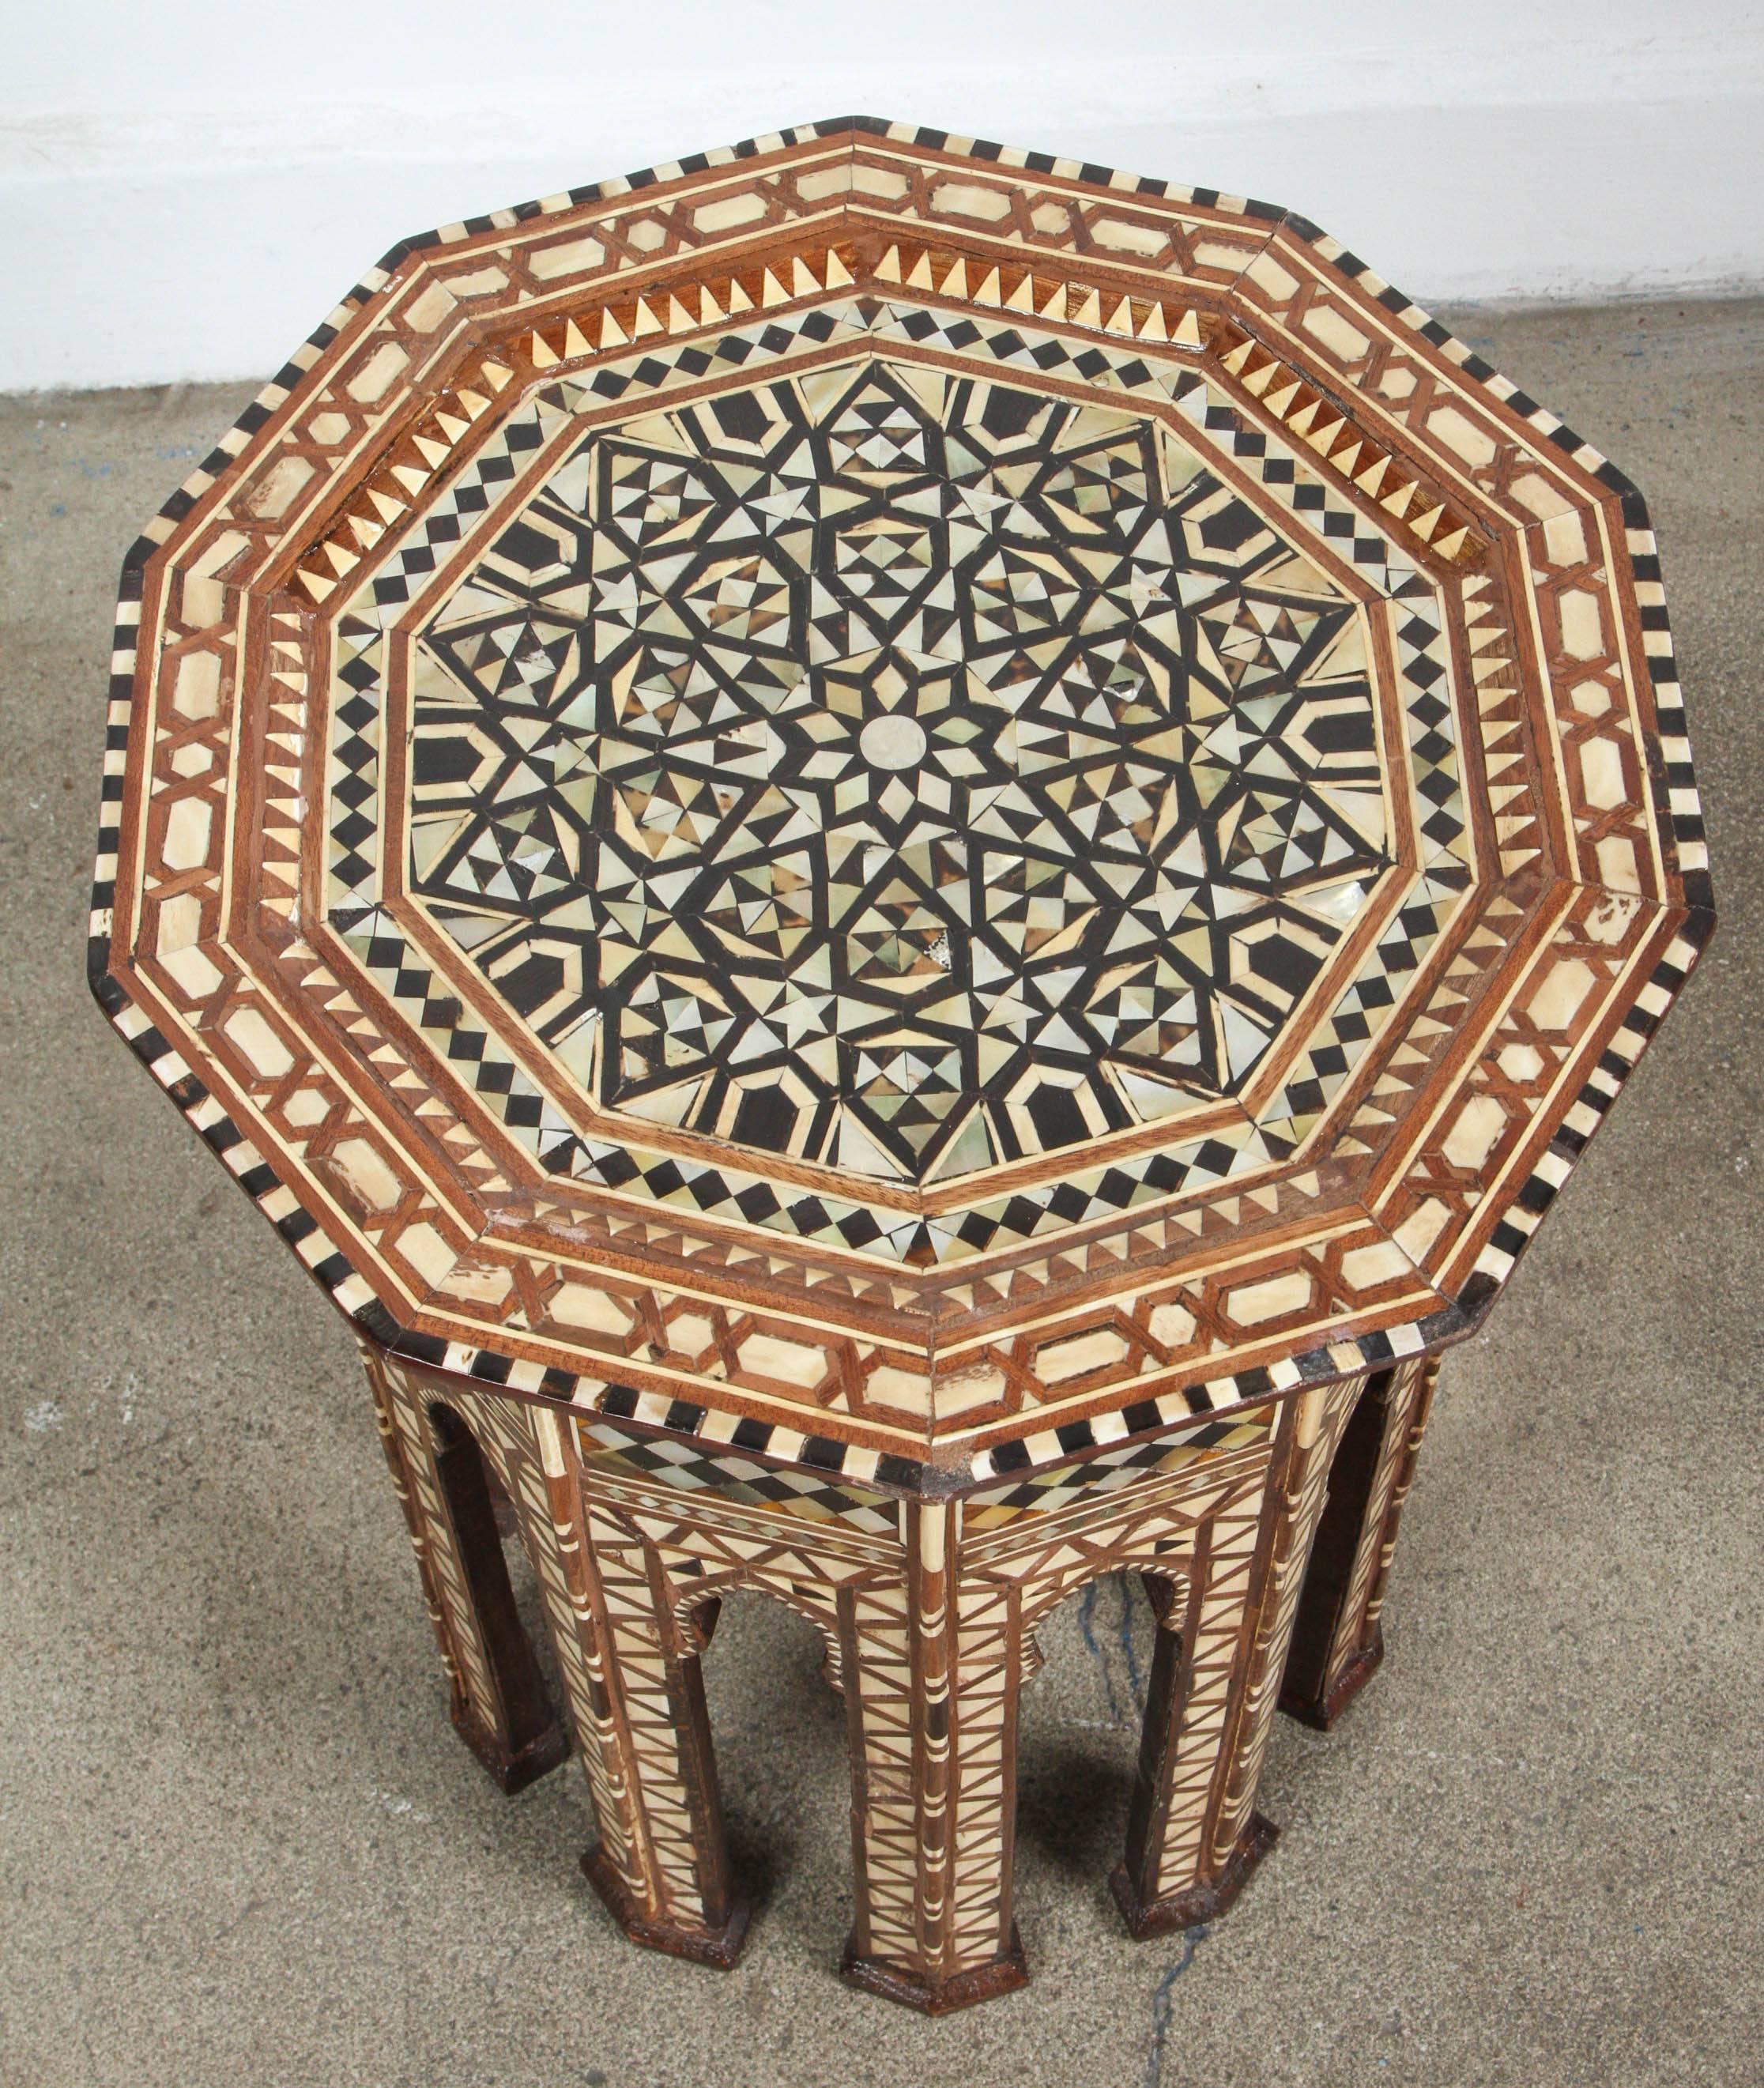 20th Century Syrian Octagonal tables Inlaid with Mother-of-Pearl